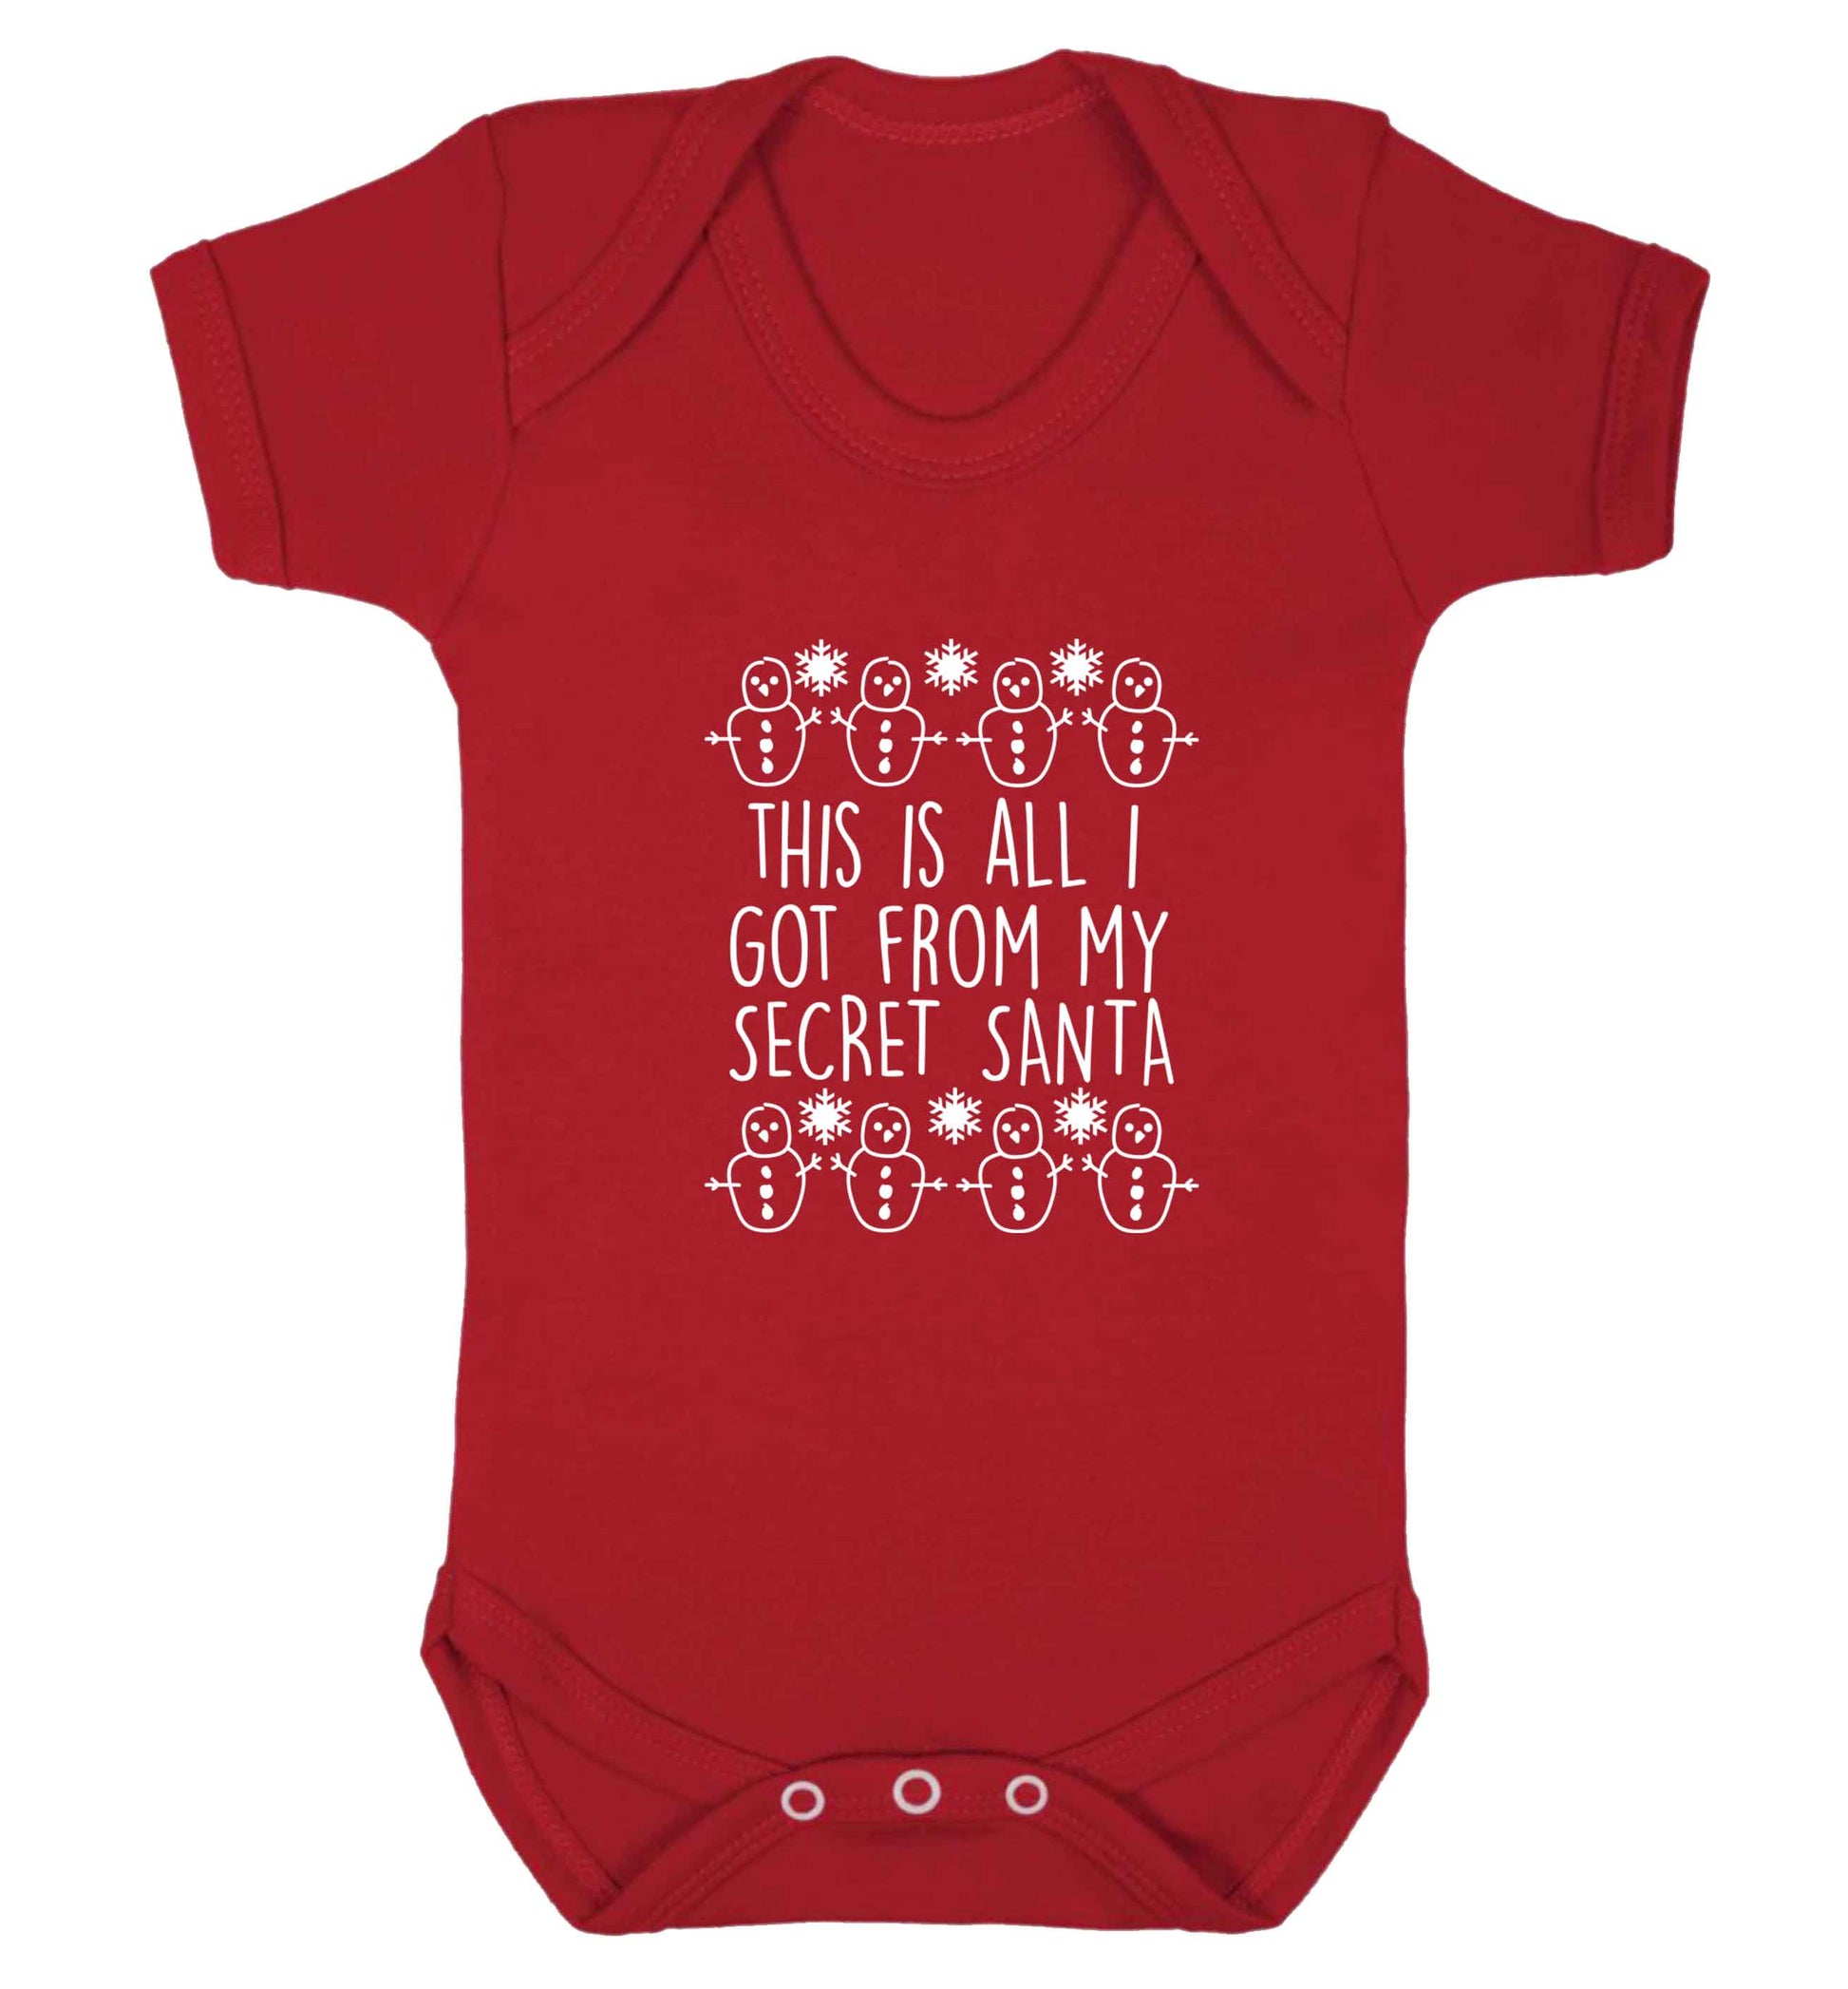 This is all I got from my secret Santa baby vest red 18-24 months